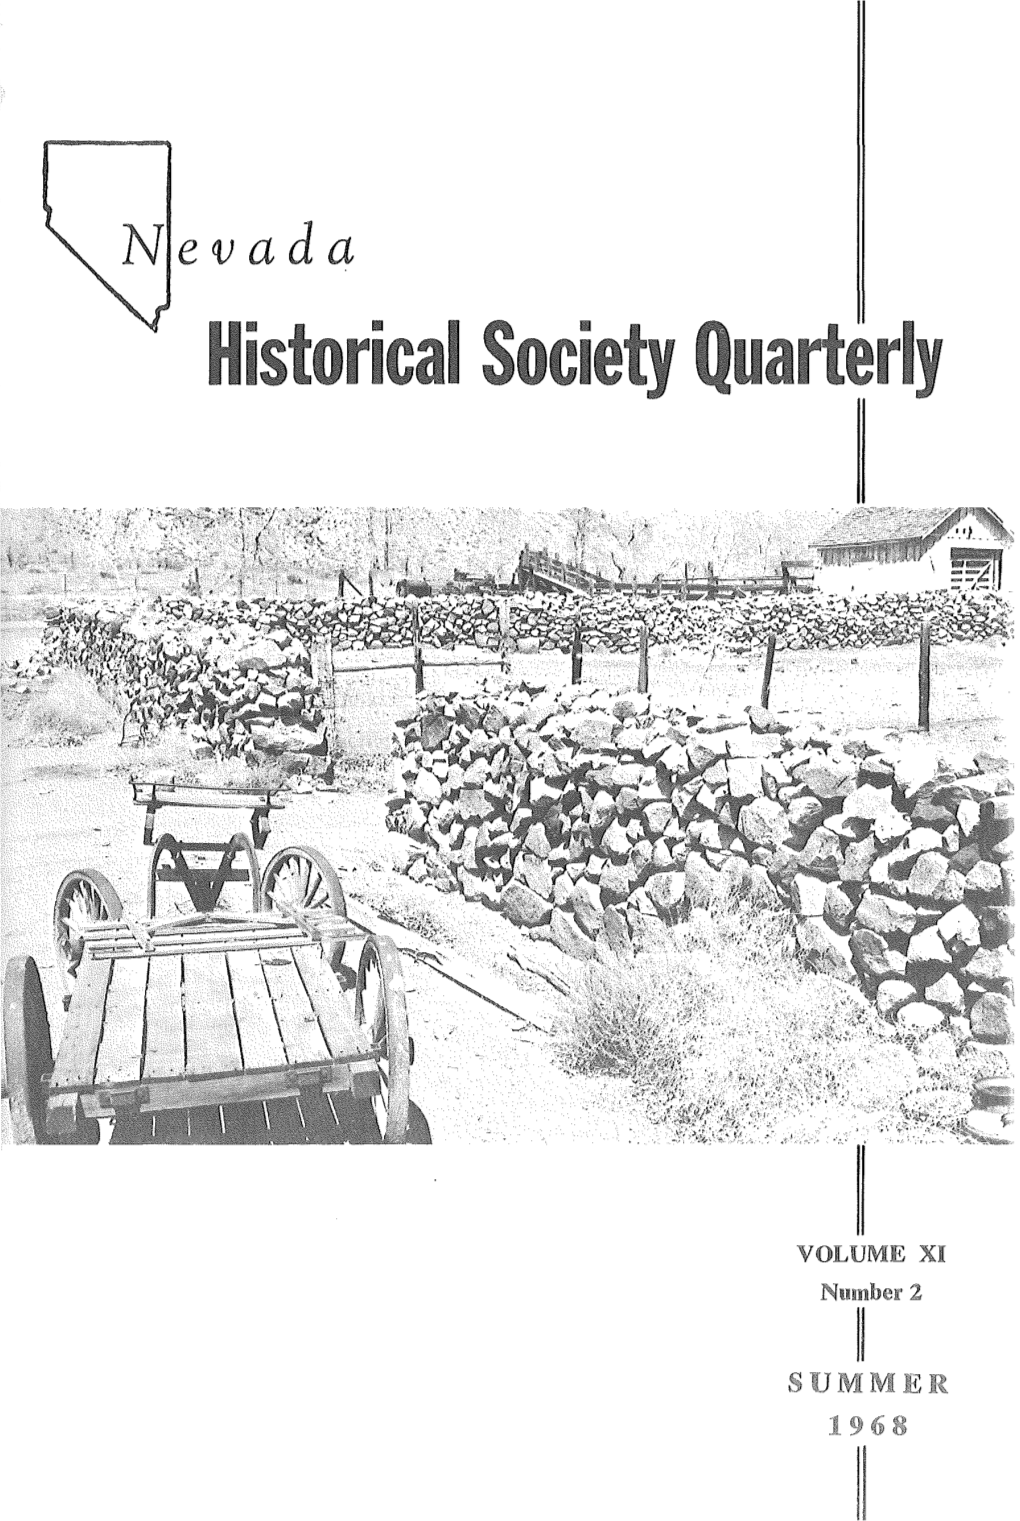 WOVOKA Corral at One of the GRACE DANGBERG Wilson Ranches, Mason Valley, Where Wovoka Worked in His Later Years